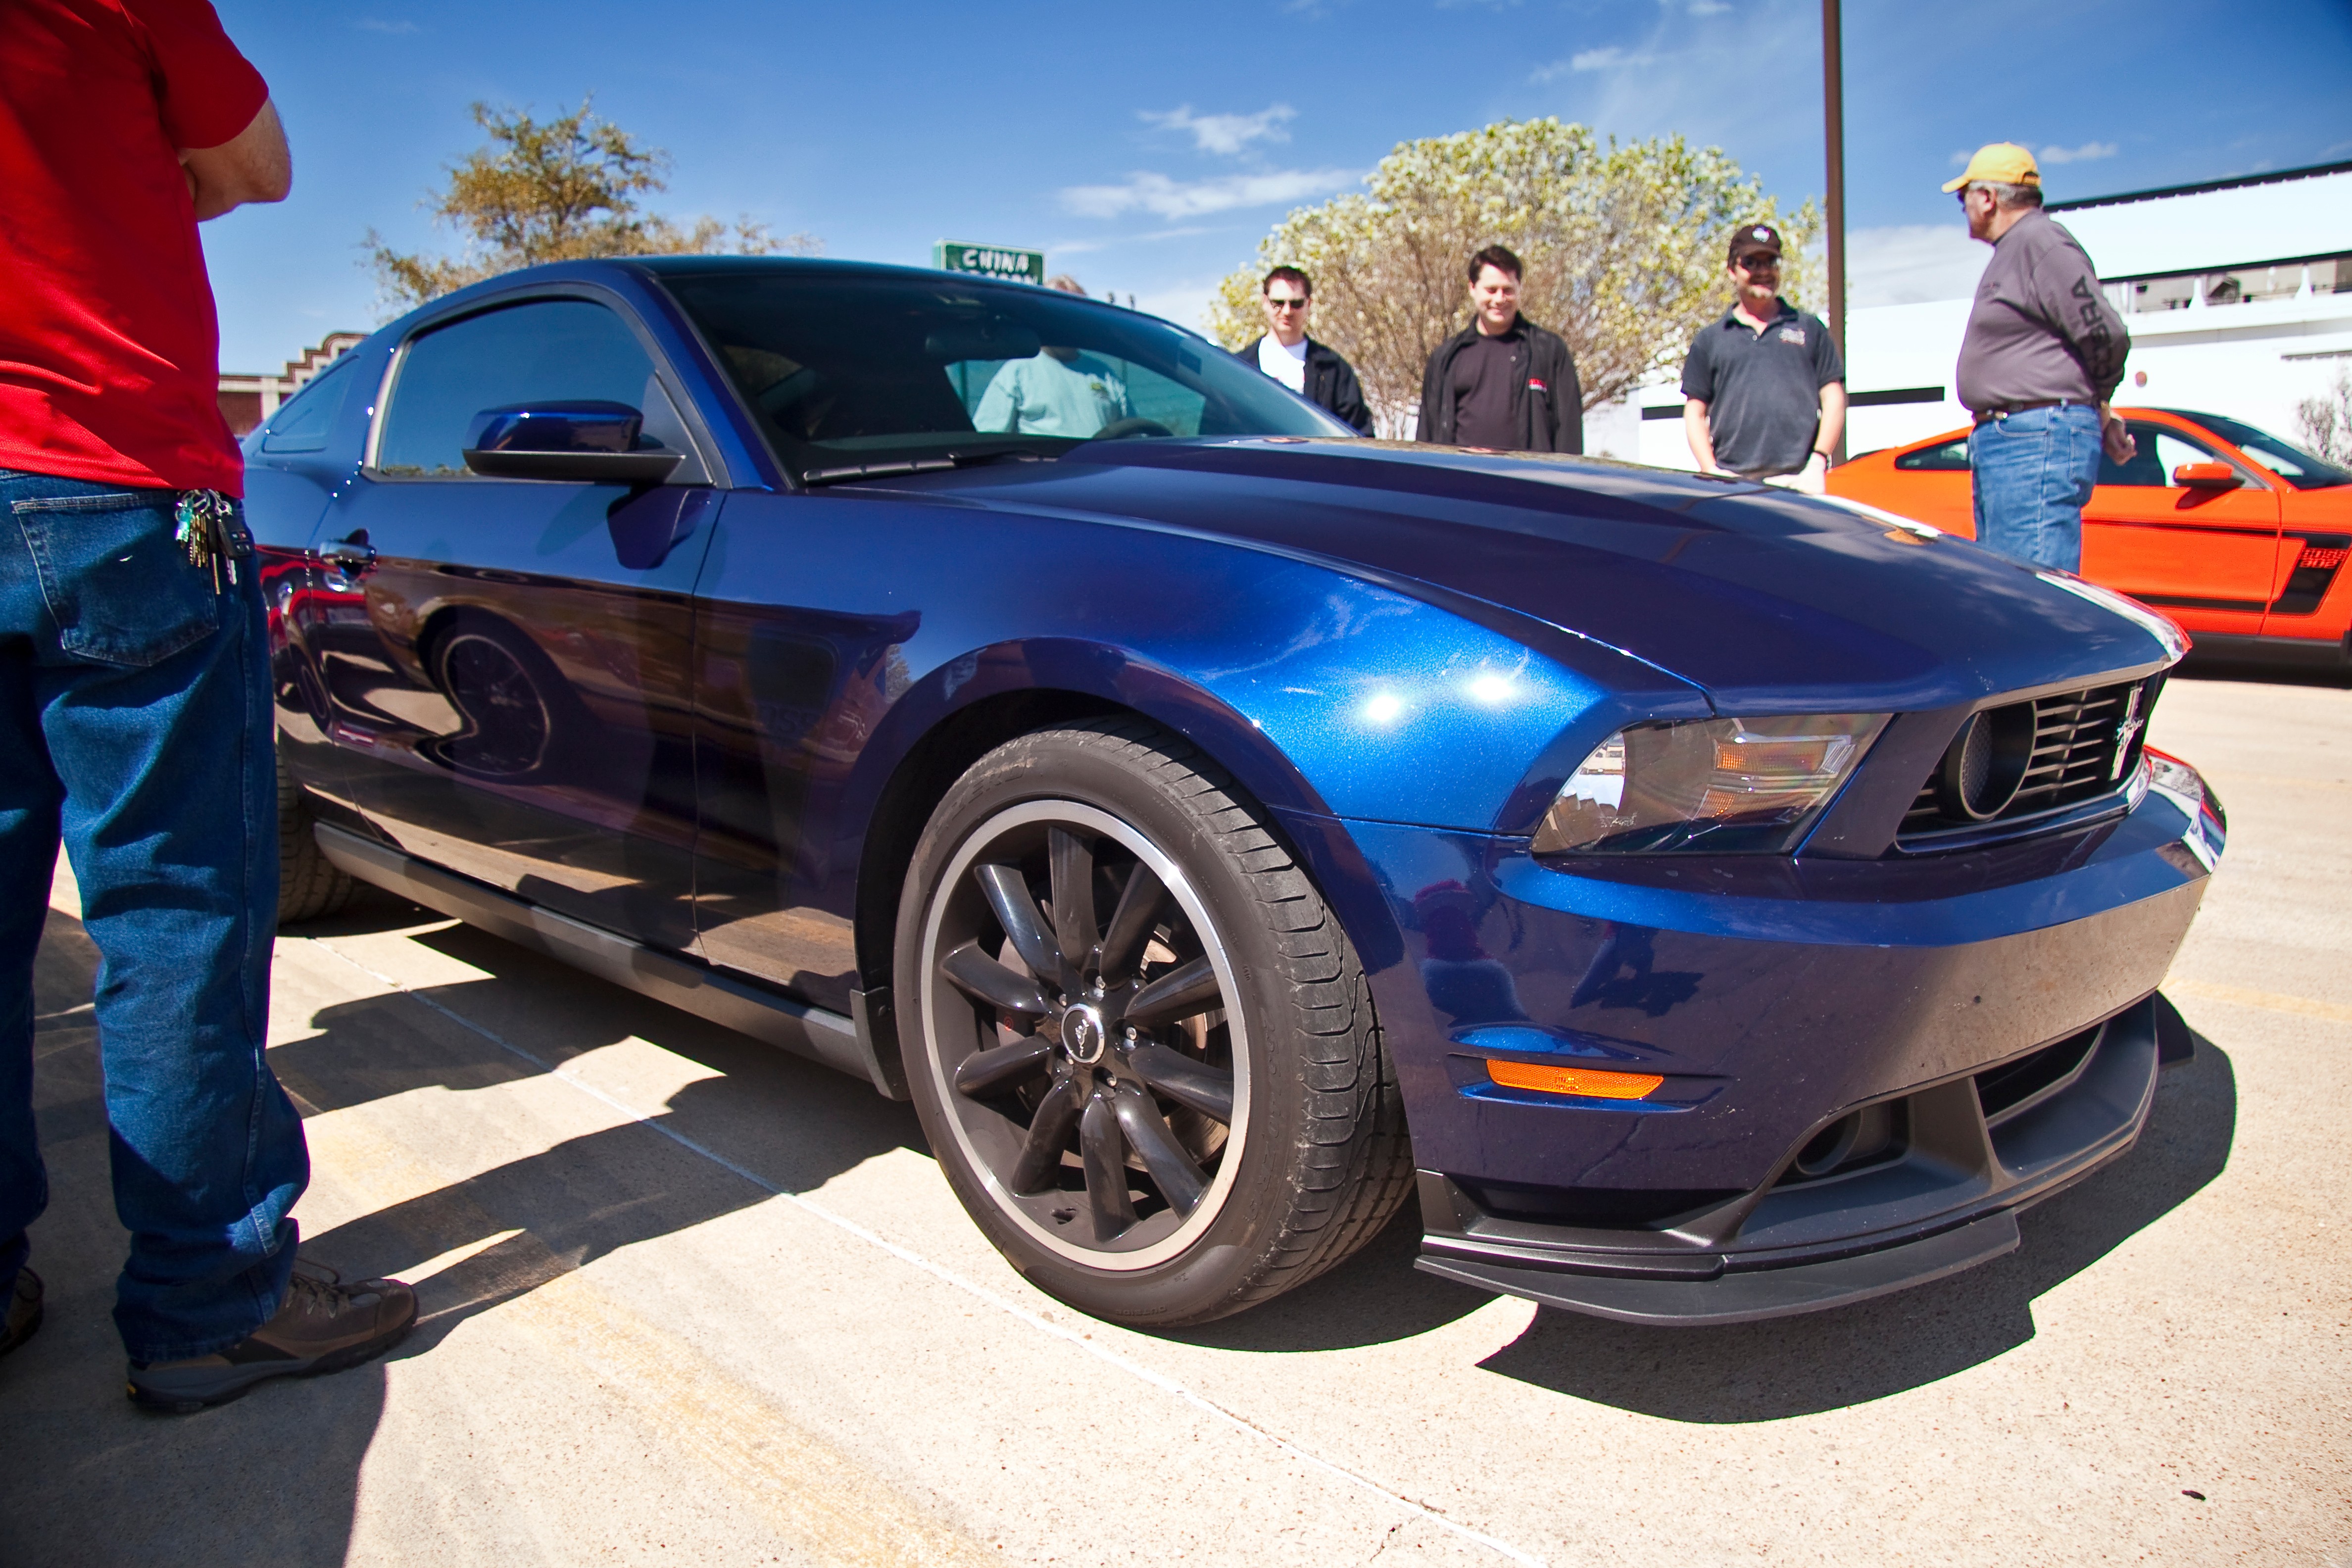 General 4752x3168 car Ford Mustang Shelby muscle cars blue cars vehicle Ford Mustang S-197 II Ford American cars